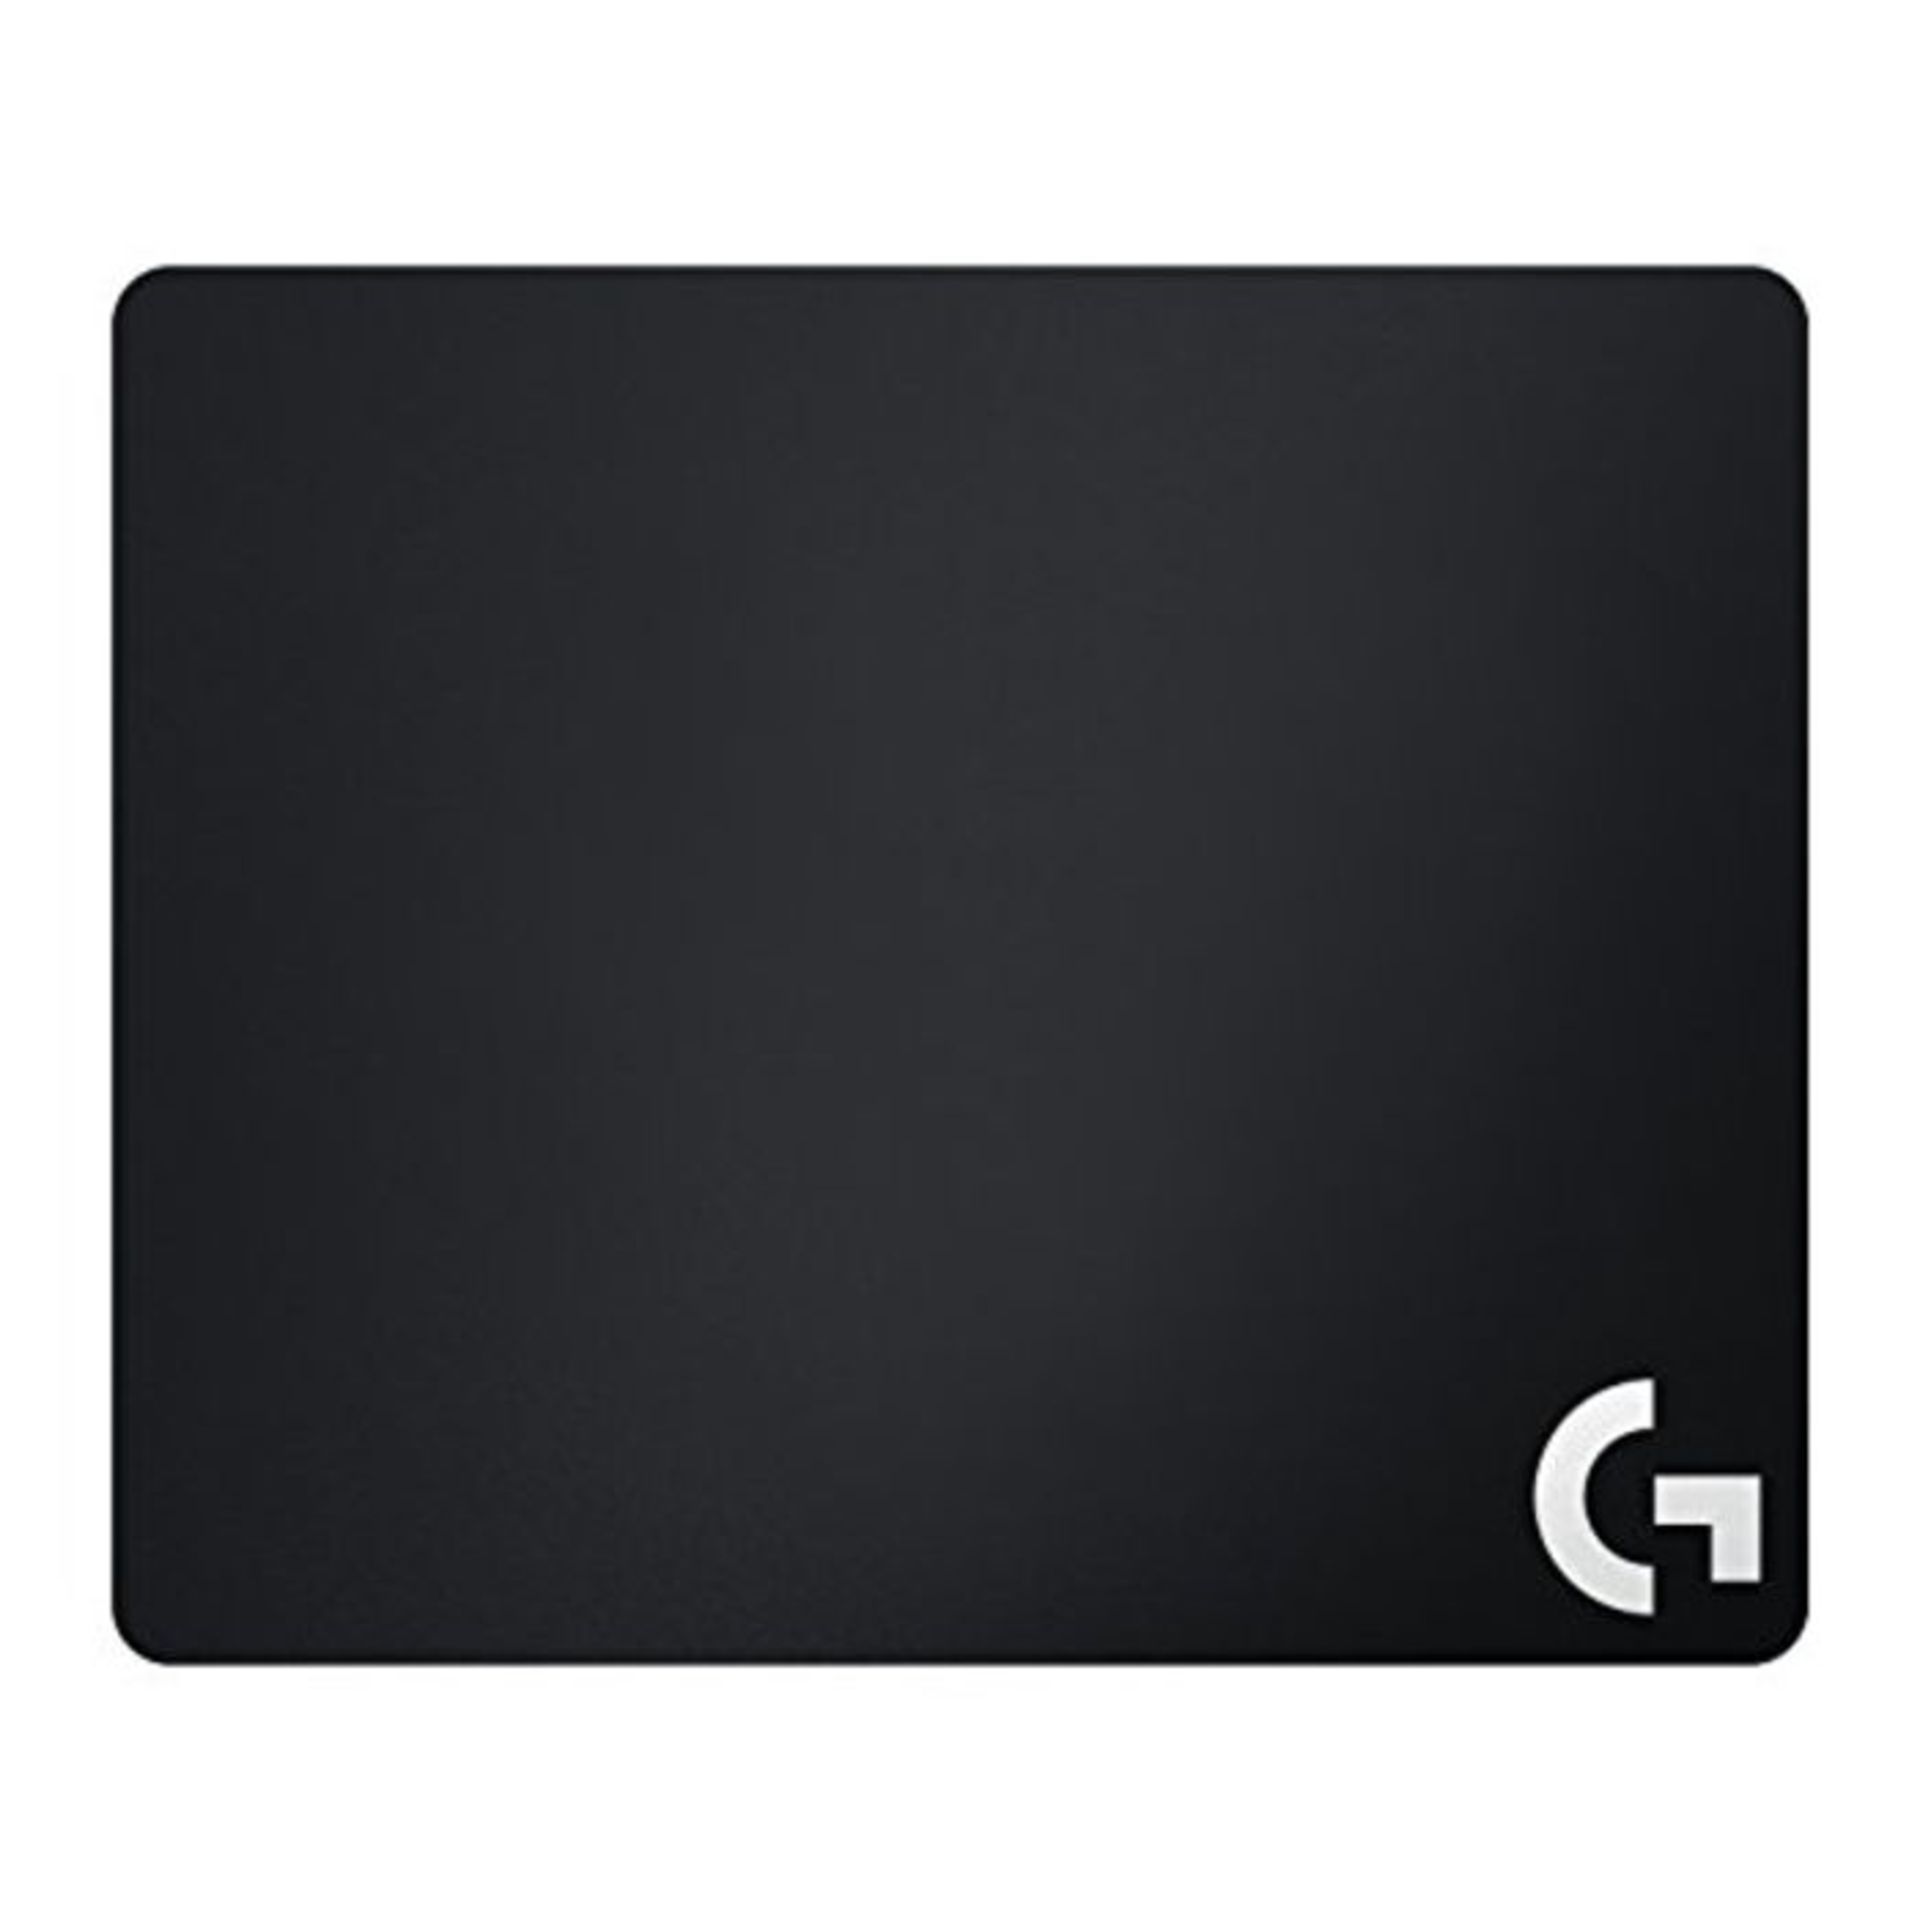 Logitech G240 Tappetino Mouse Gaming in Tessuto, Mouse Pad 340 x 280 mm, Spessore 1 mm